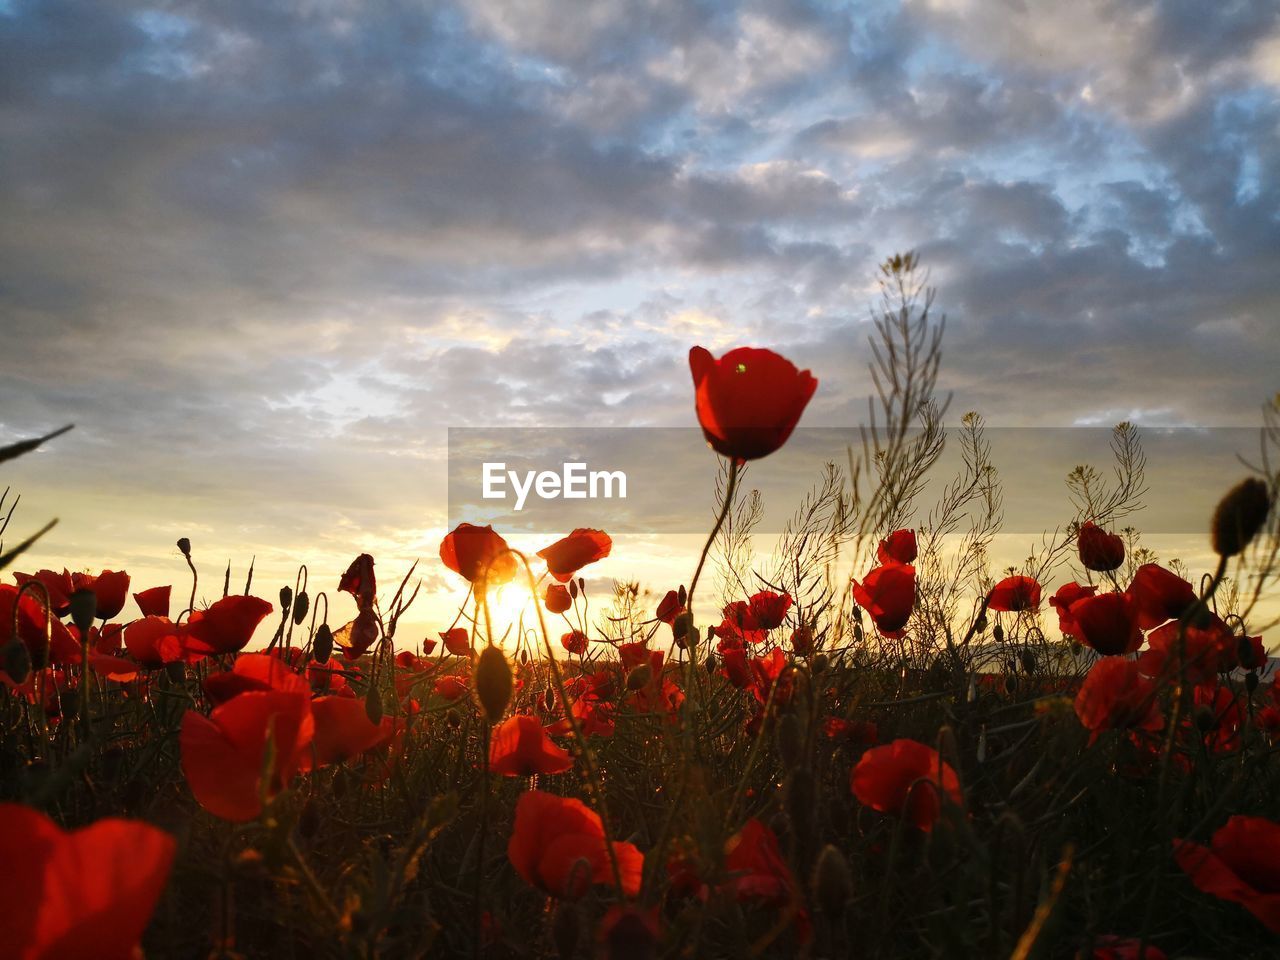 CLOSE-UP OF POPPIES ON FIELD AGAINST SKY